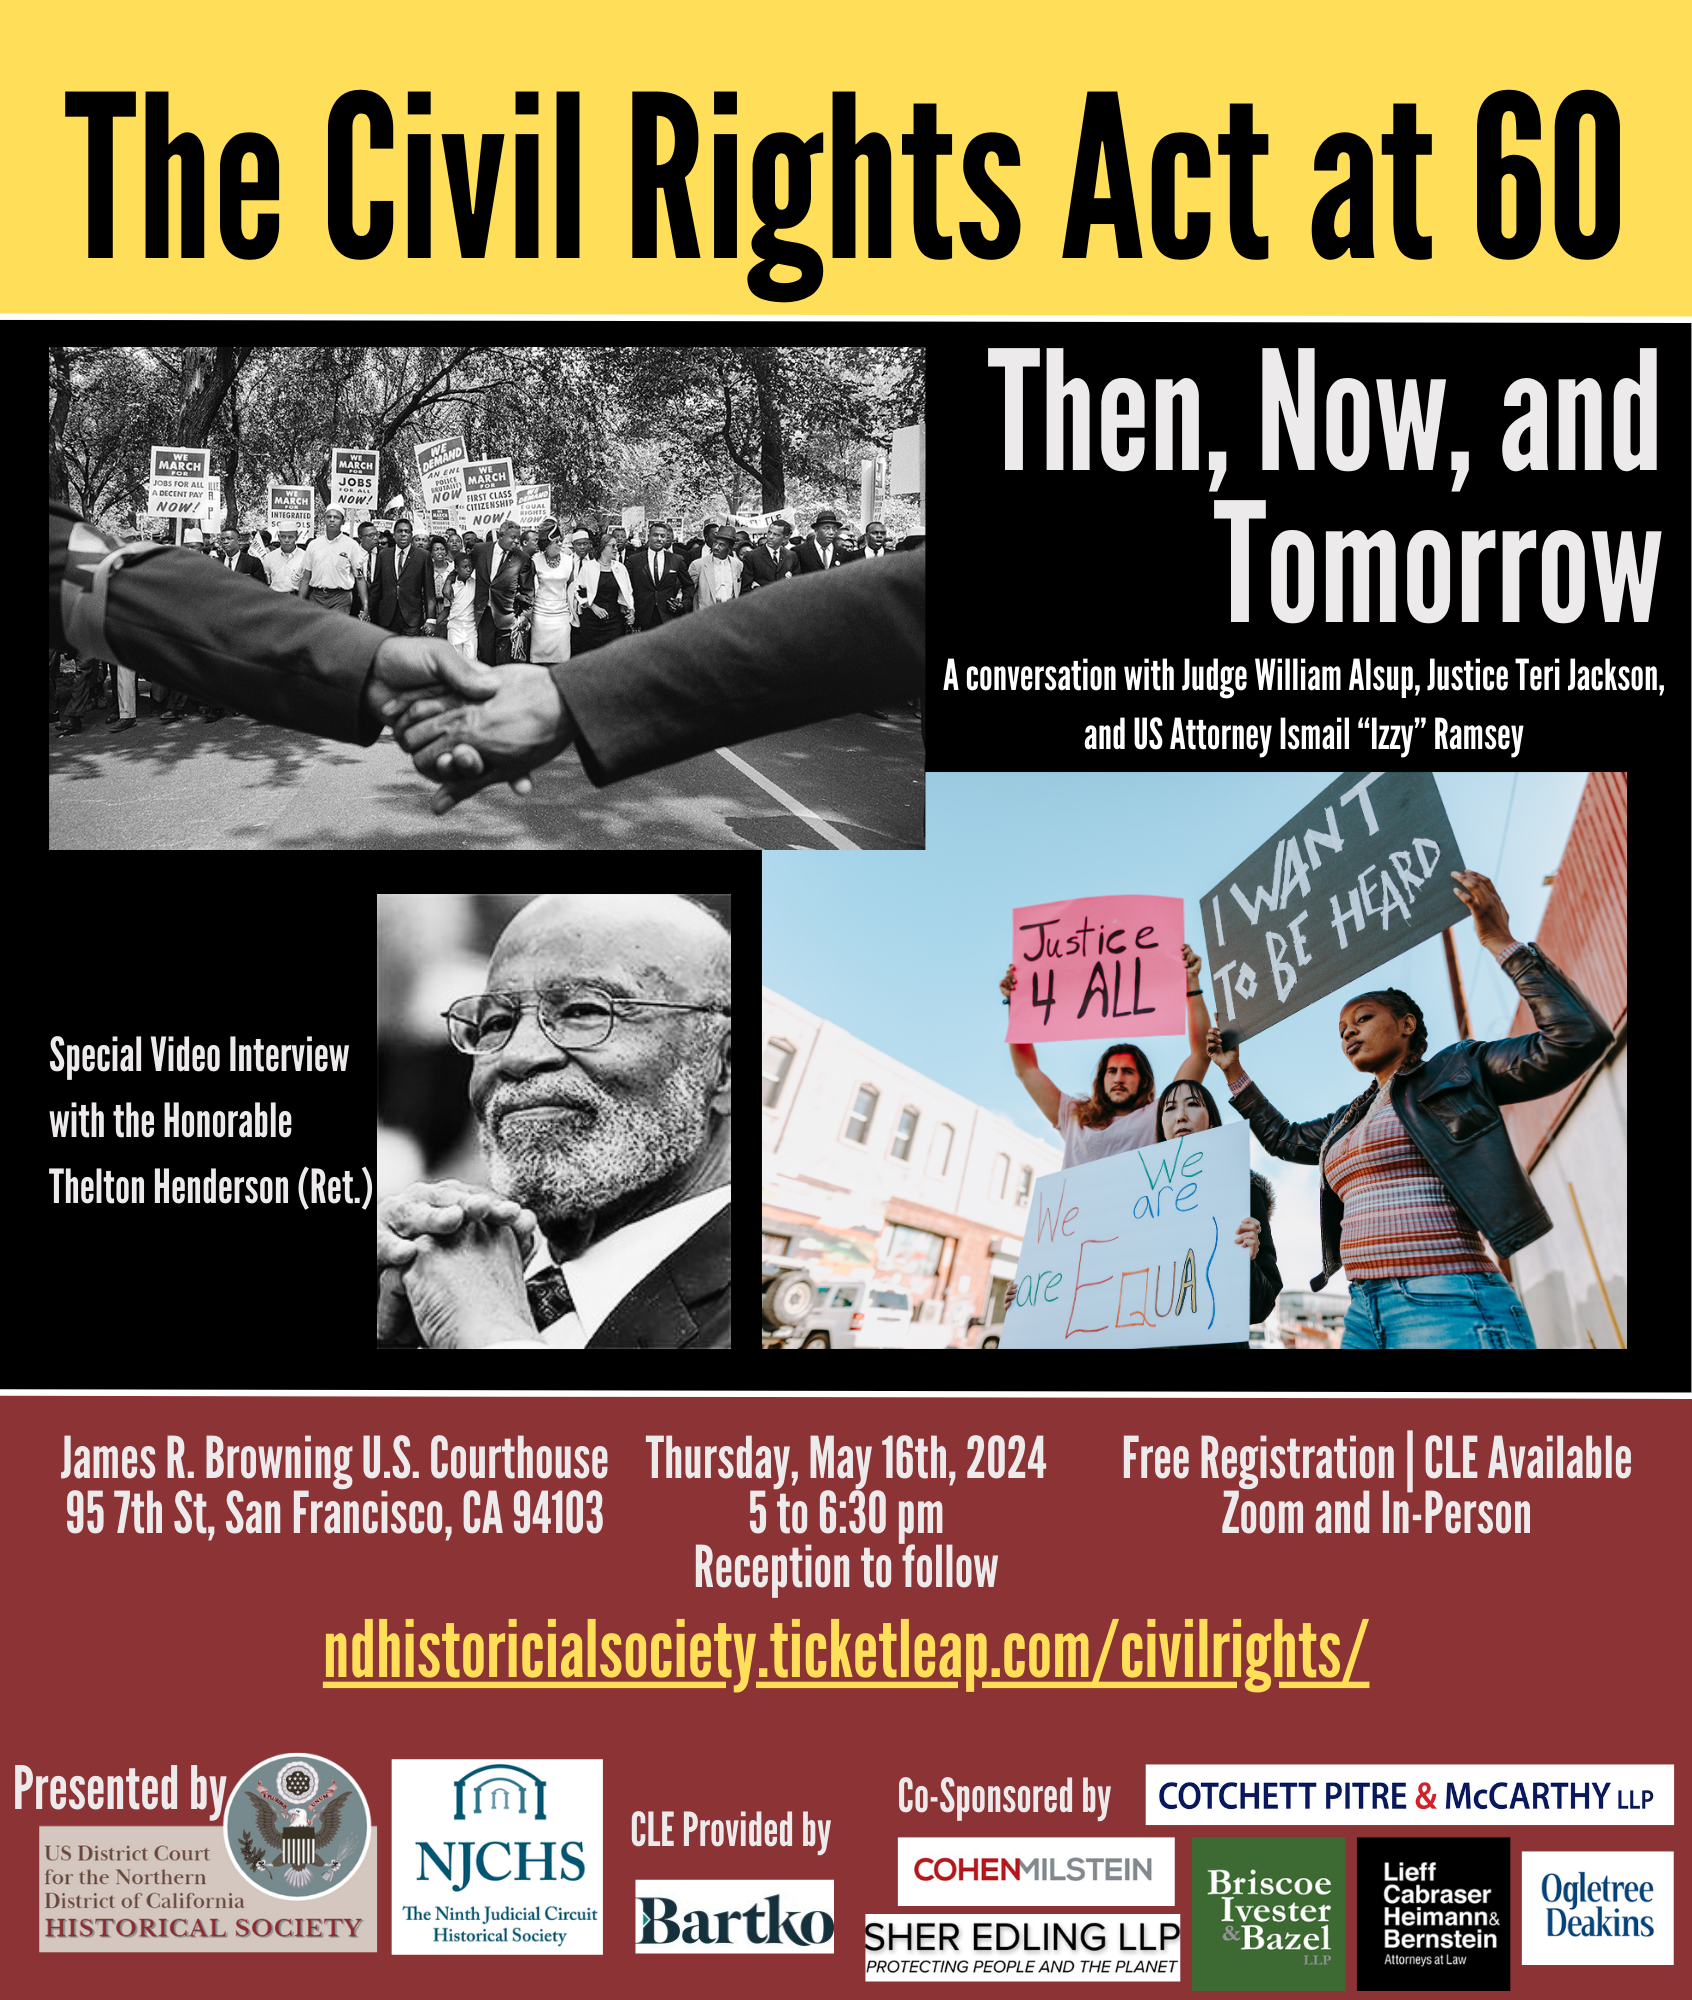 More about The Civil Rights Act at 60: Then, Now, and Tomorrow...